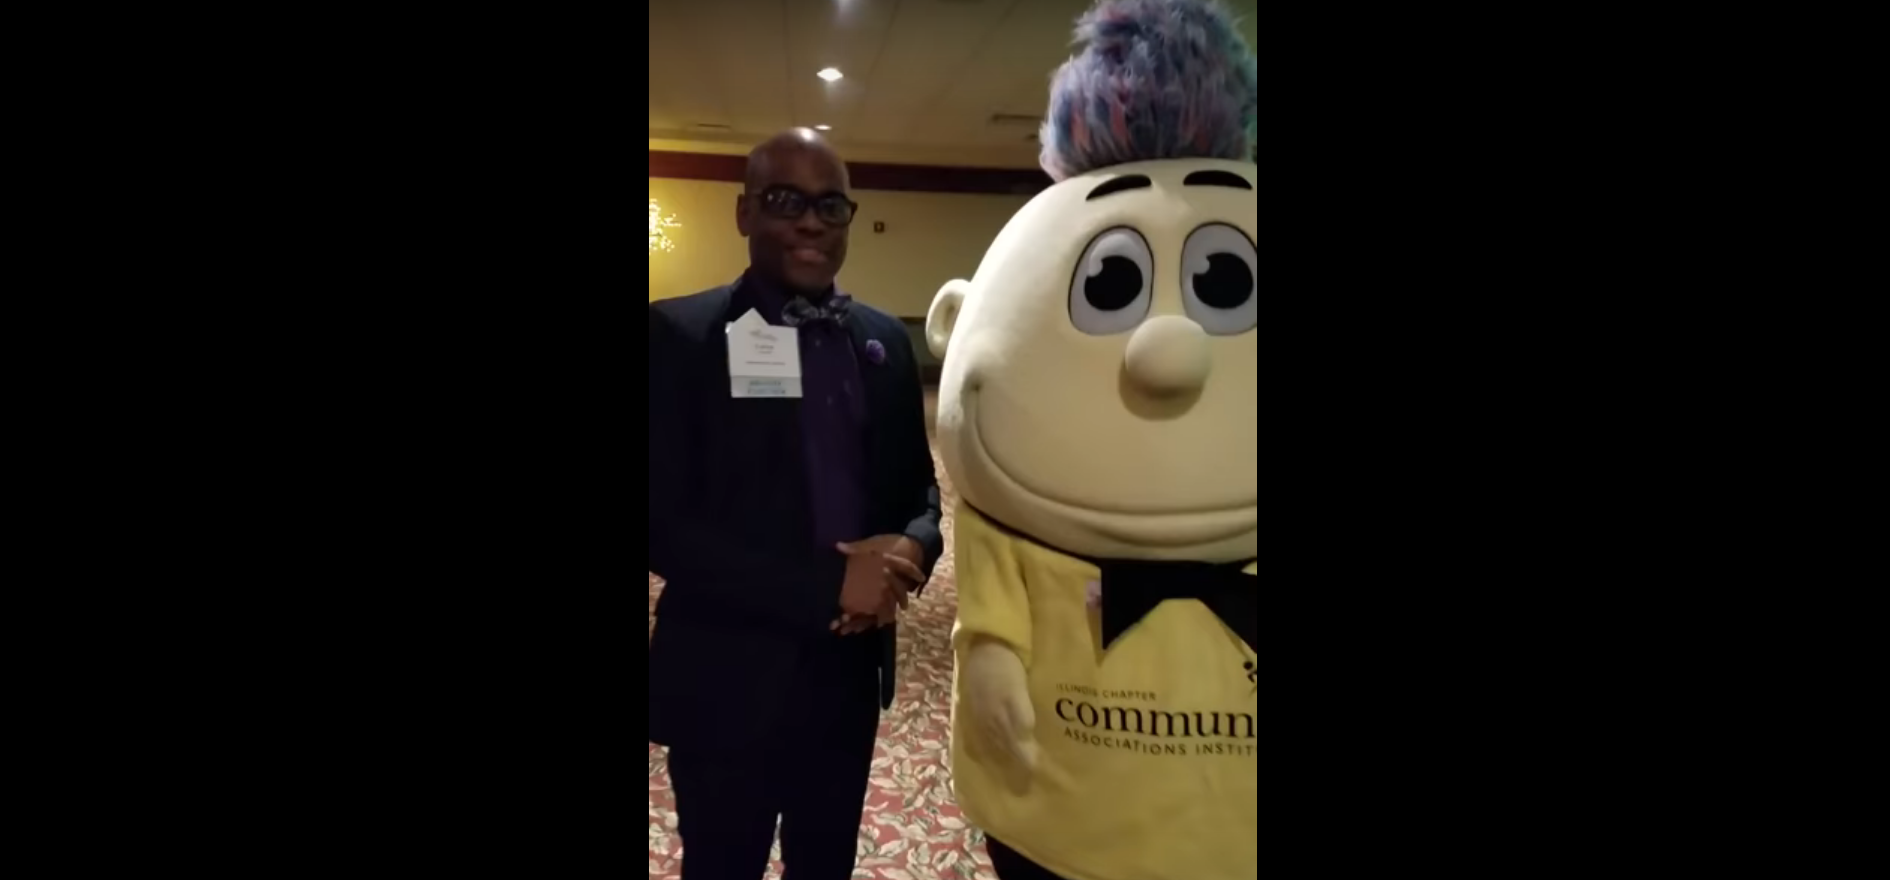 member at CAI conference standing next to a mascot